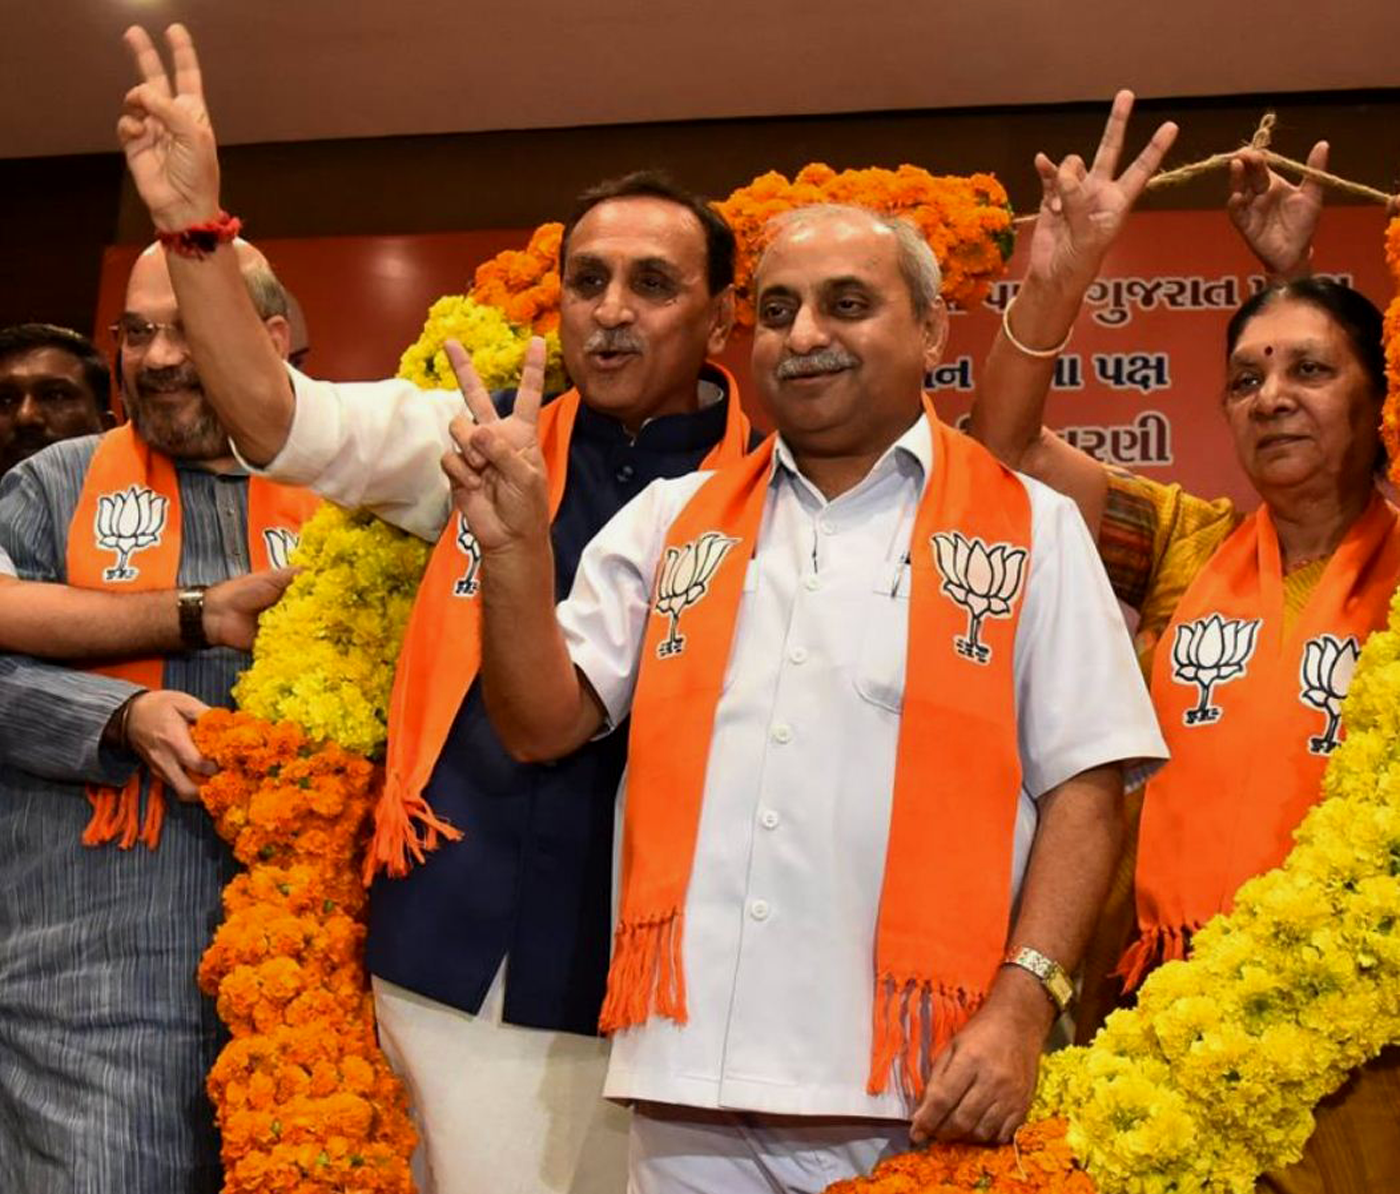 Vijay Rupani and Nitin Patel to continue as CM and Dy CM of Gujarat